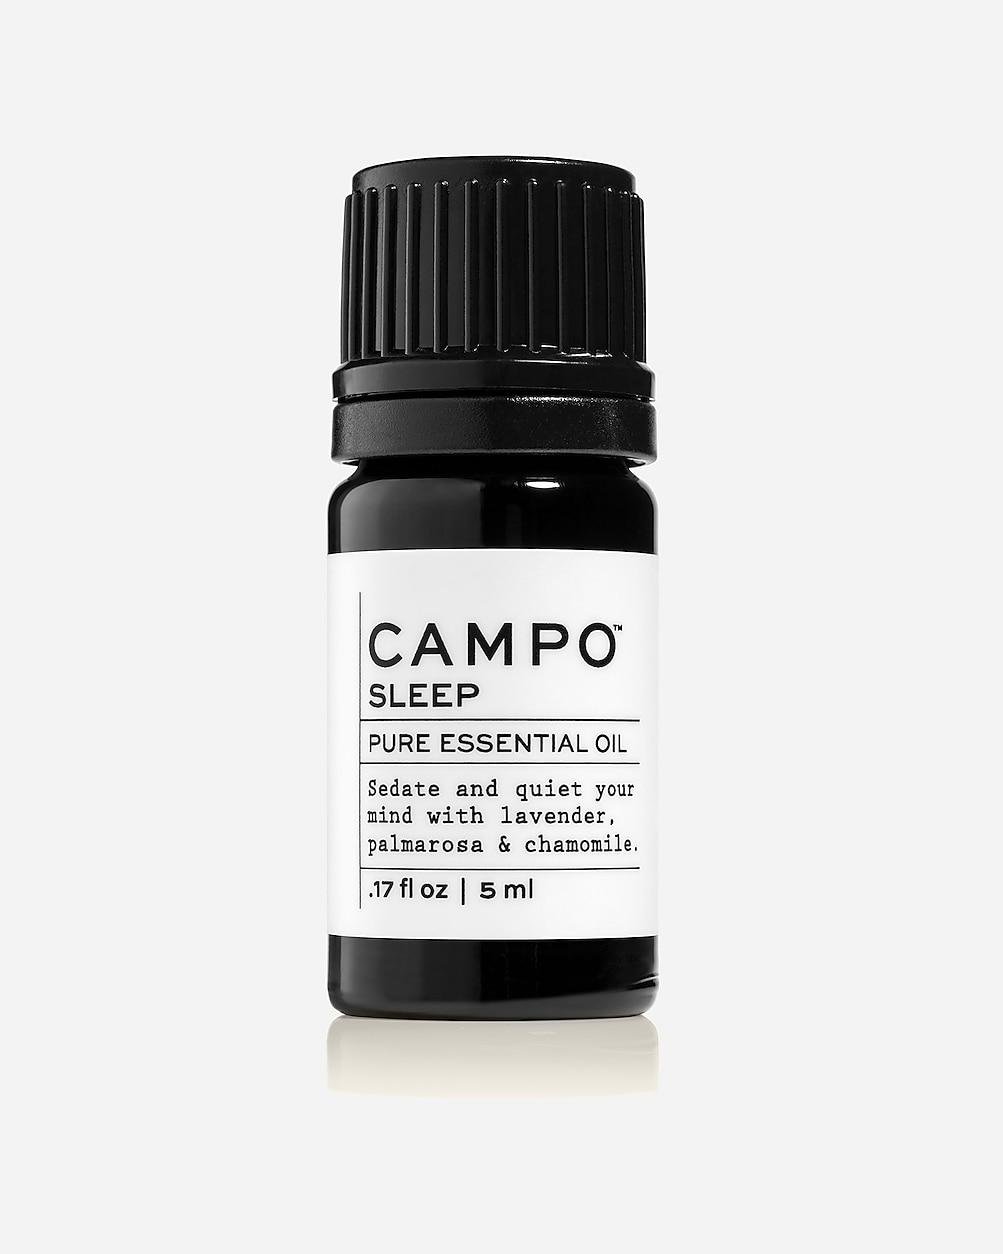 CAMPO® SLEEP BLEND pure essential oil by J.CREW